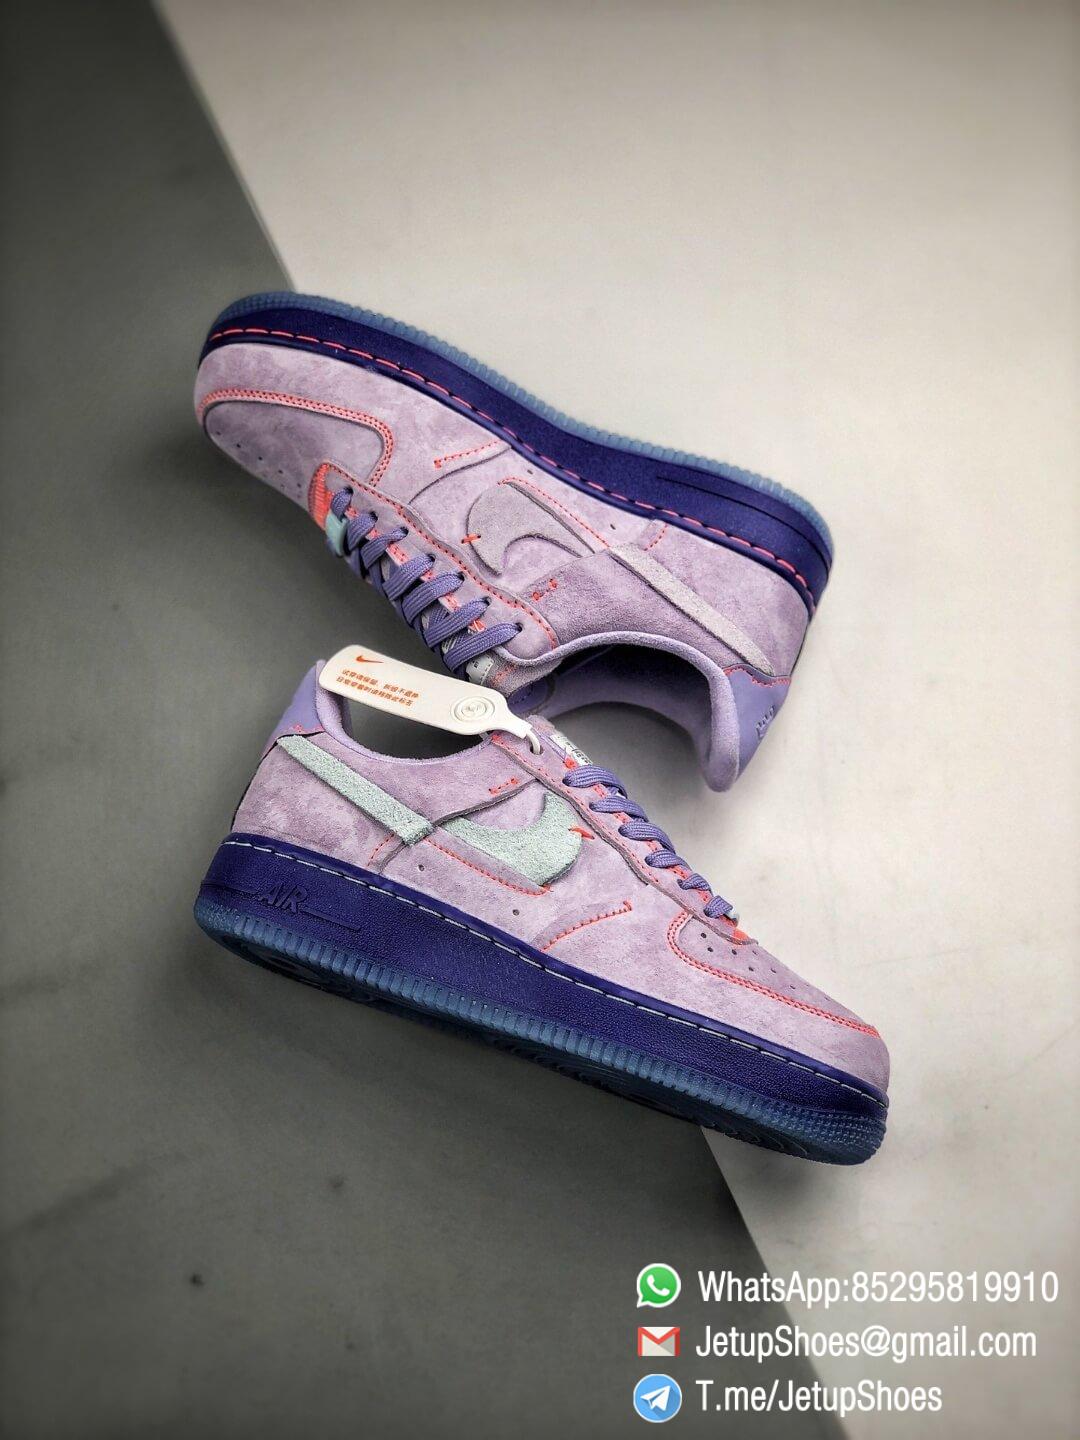 The Nike Wmns Air Force 1 Low LX Purple Agate Suede Upper Orange Stitches Ocean Blue Outsoles Repsneaker 11